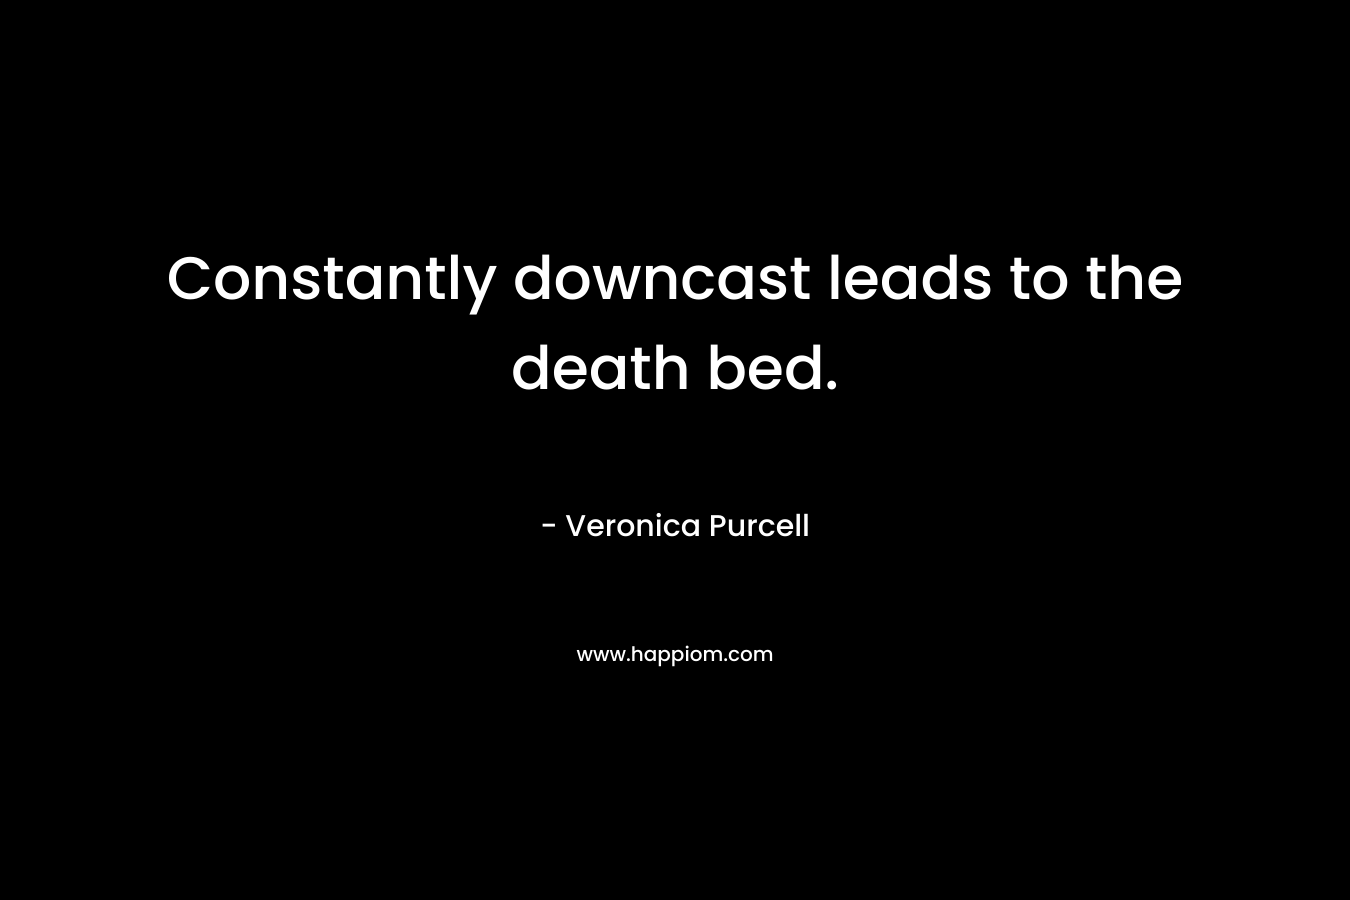 Constantly downcast leads to the death bed.